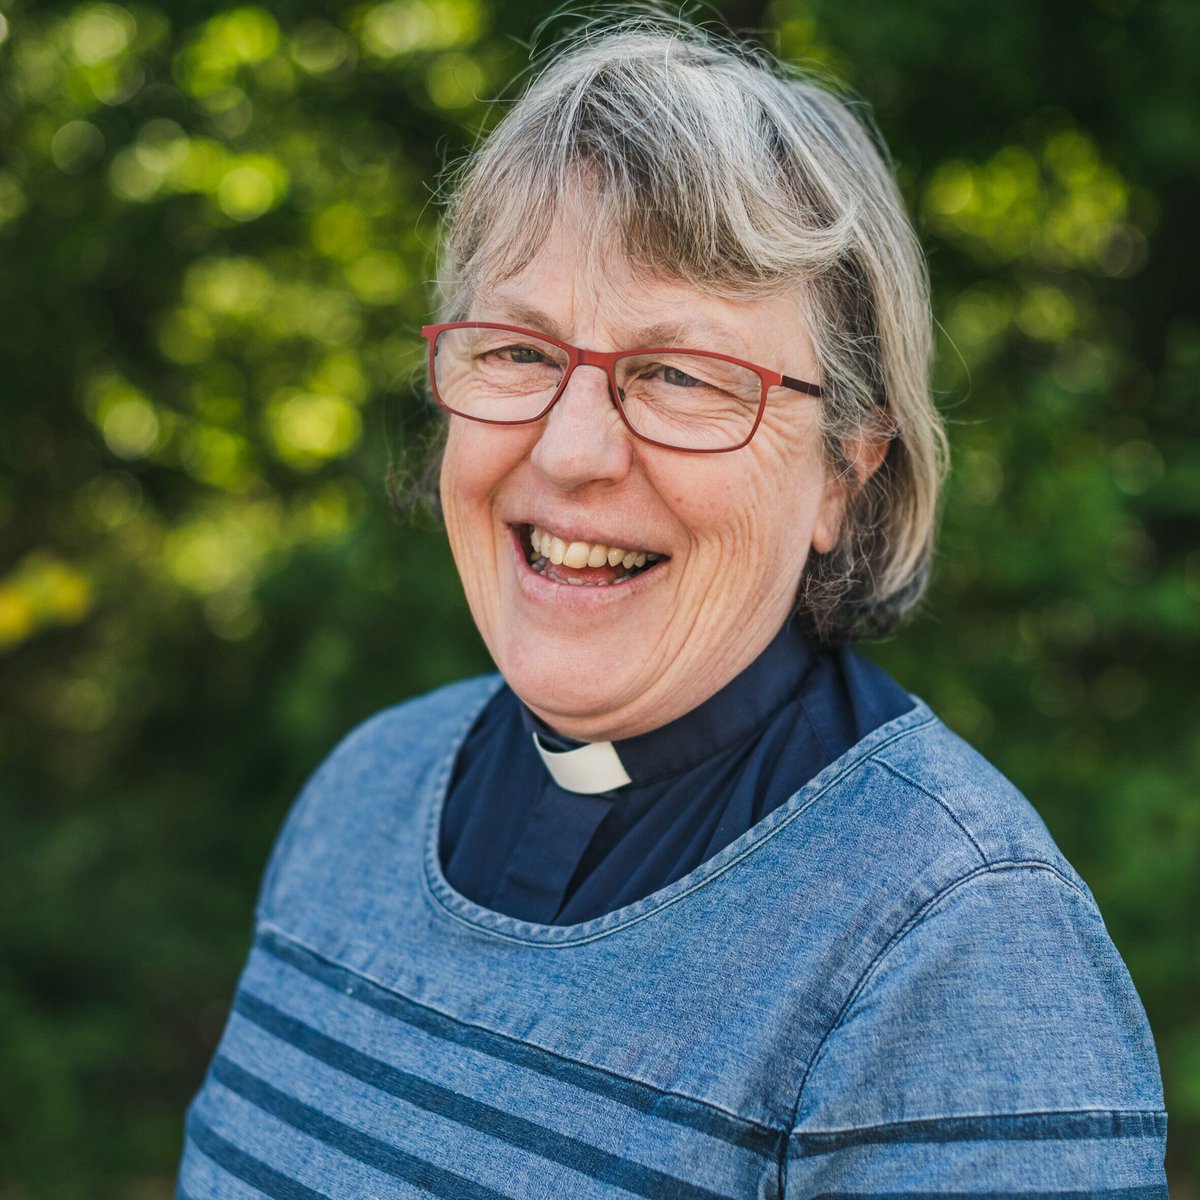 We Have Voices: Praying together for peace, justice and change, a new book of prayers to empower church communities to focus more fully and publicly on matters of justice, editted by @opentablelgbt Patron Revd Dr Barbara Glasson. Read more: buff.ly/49WefN9